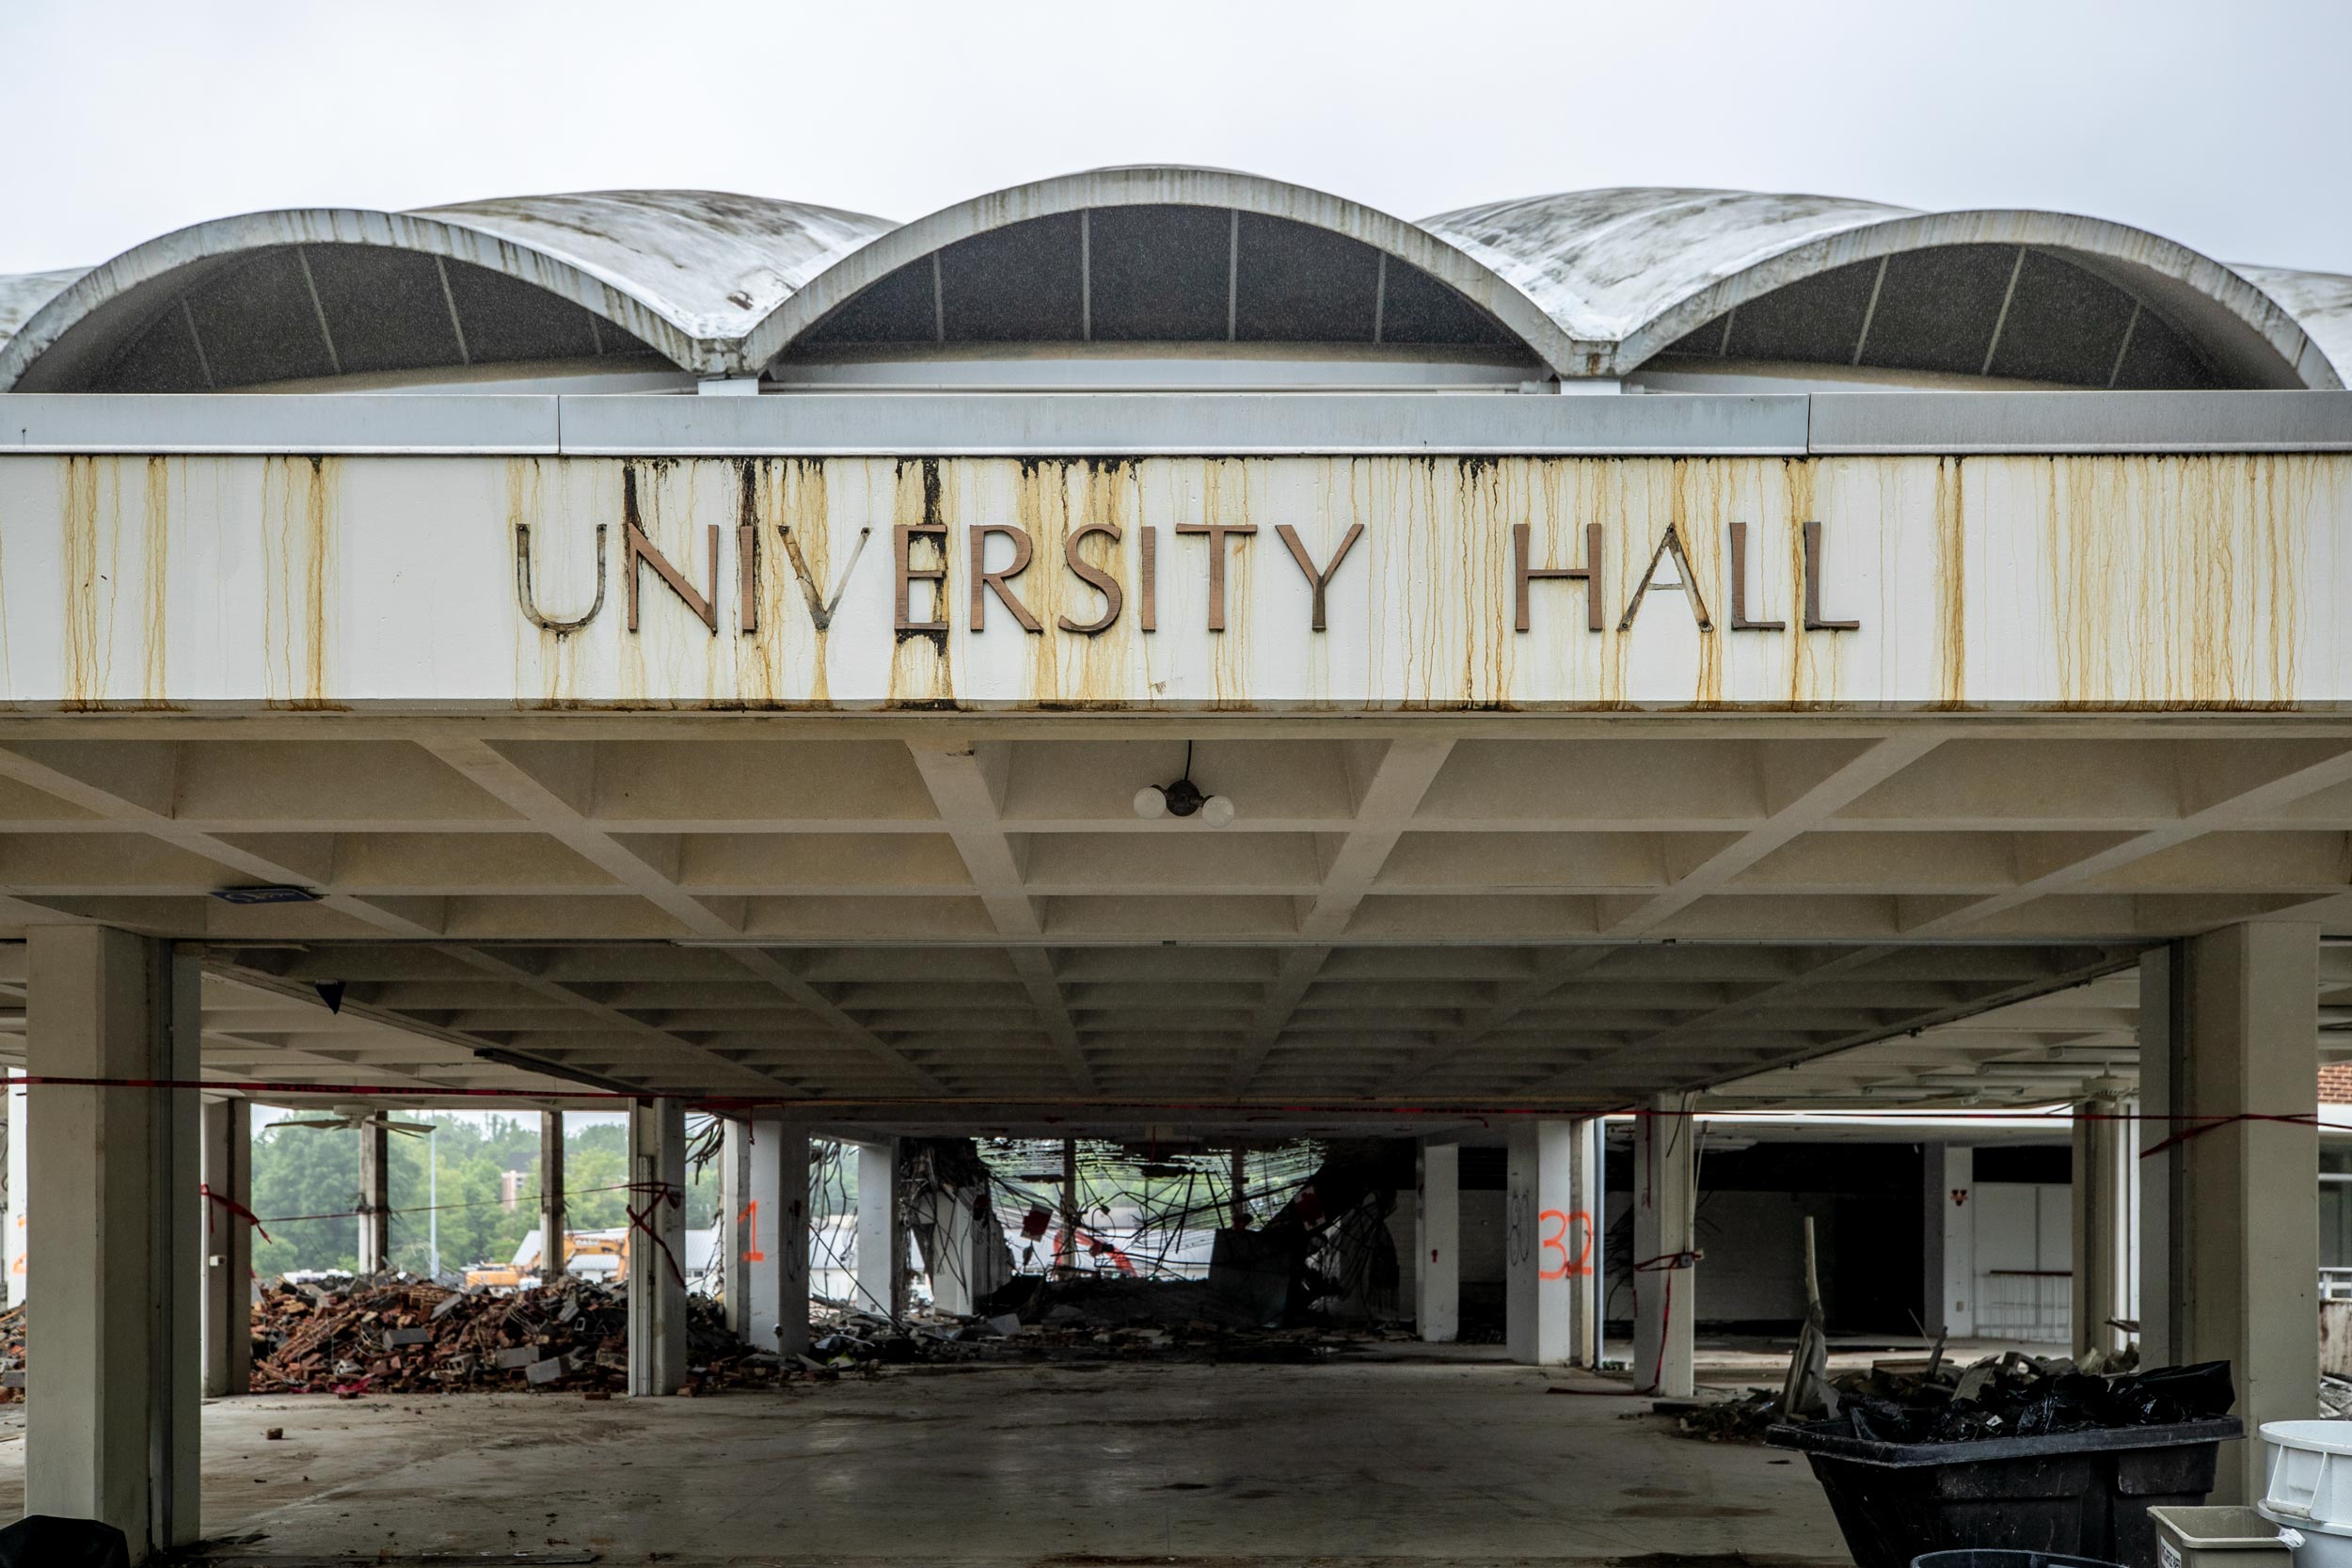 View of University Hall Entrance with the whole building gutted and emptied